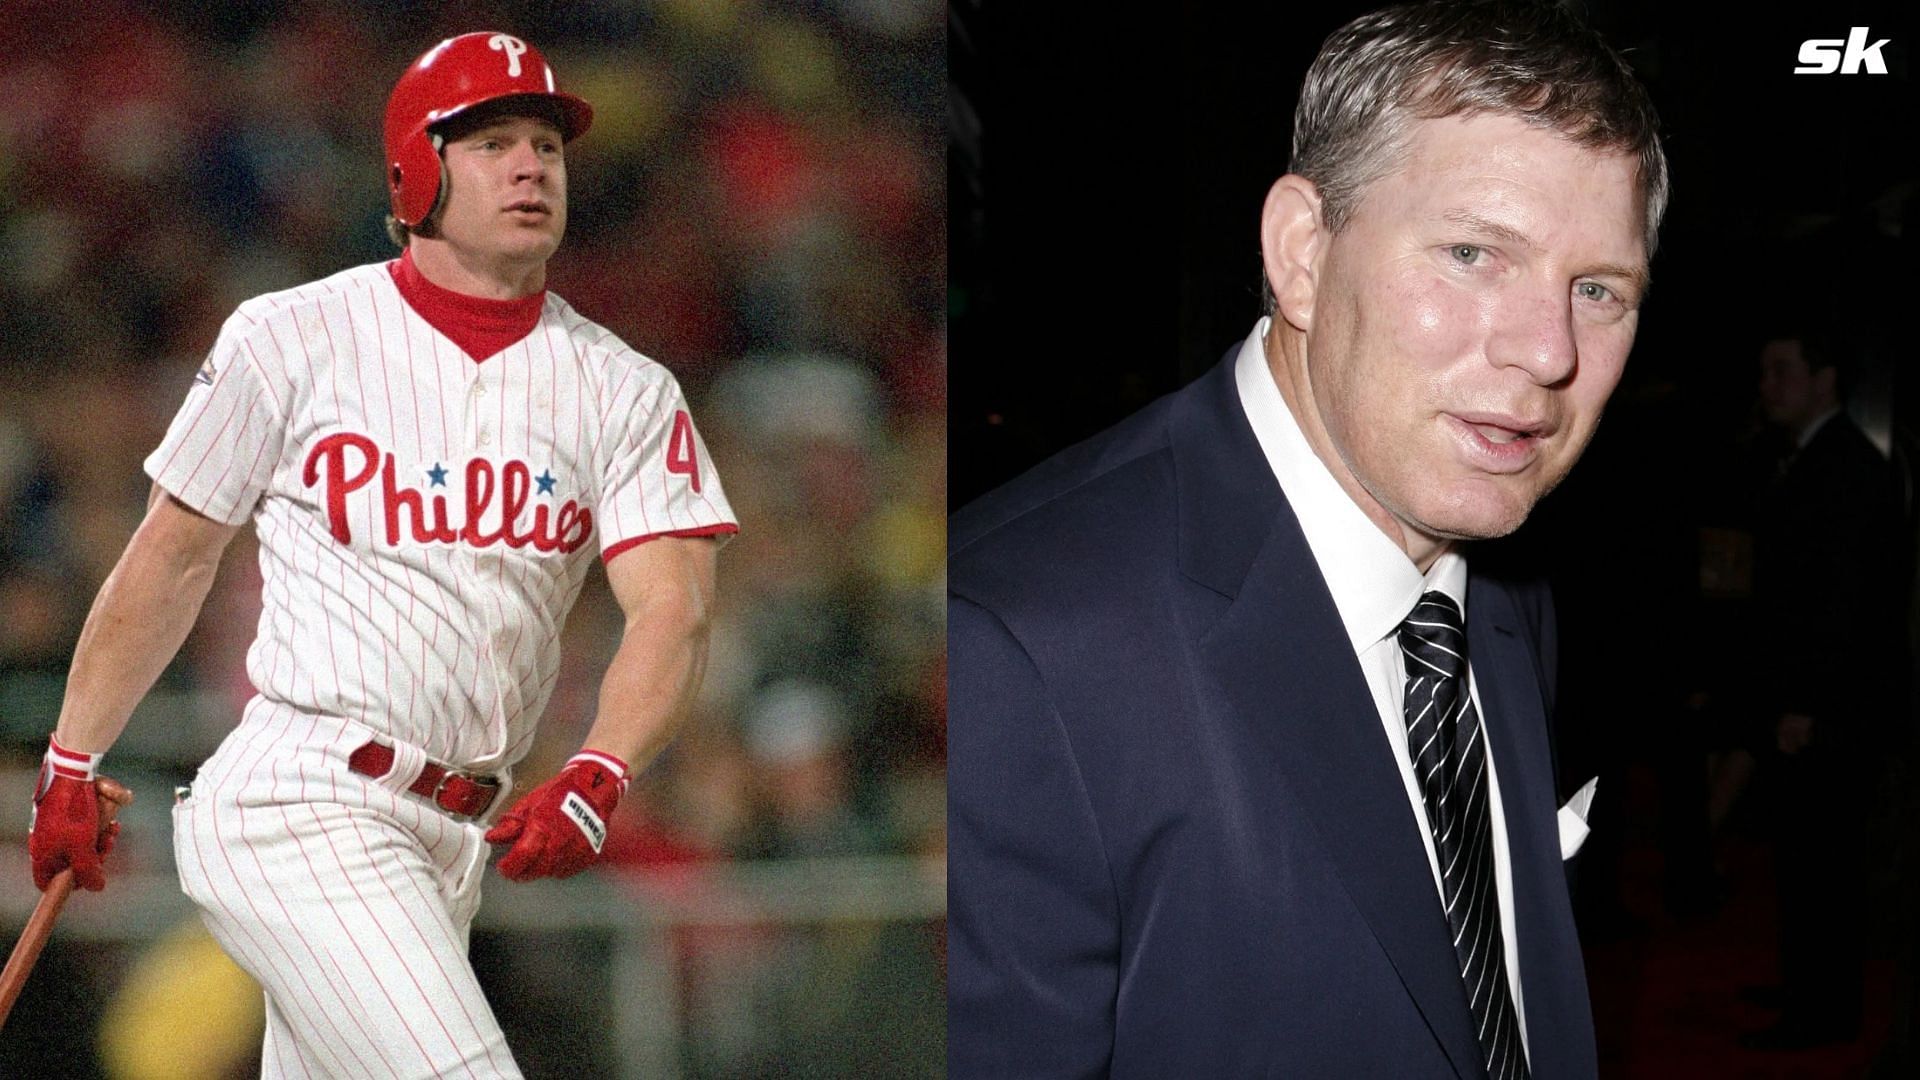 Ron Darling: Court's opinion on MLB Legend Lenny Dykstra in 2020: Dykstra  was infamous for being, among other things, racist, misogynist, and  anti-gay, as well as a sexual predator